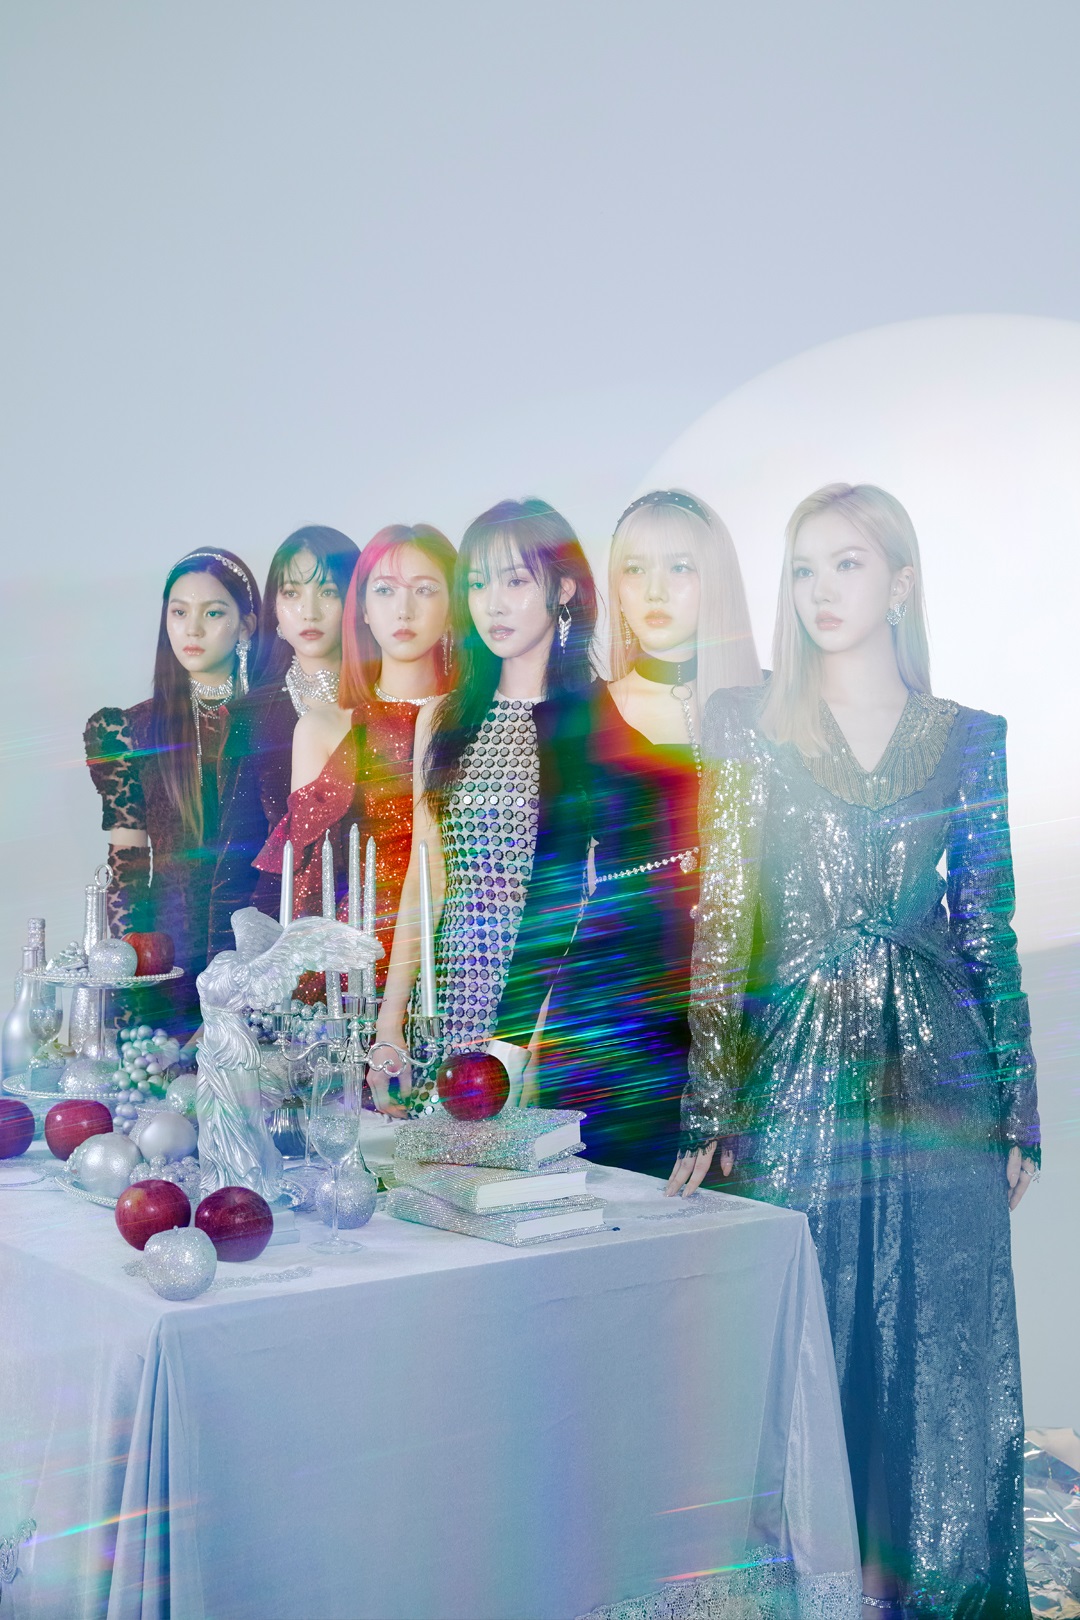 Group GFriend has released all the concept photos of the new album and finished the comeback pre-heat.GFriend presented the Apple version concept photo of the new Mini album : Song of the Sirens on the official SNS channel on the 4th.The photo shows the glamorous costumes, makeup, fascinating eyes and facial expressions of GFriend, creating an ecstatic atmosphere.The reflected light and lighting are added to it, giving it a dreamy and mysterious feeling.The personal photos released together are raising the curiosity about the new album with a more intense and colorful appearance that seems to be intoxicated by something through red apples and shiny and colorful props.As a result, GFriend released all three versions of the concept photo, starting with the Broken Room version of the new Mini album : Song of the Sirens on the 30th of last month, Tilted version and Apple version.Expectations are high on what to tell on the new album, such as showing a dangerous appearance in a ruined room, cutting what is better on the scale, and showing a ecstatic atmosphere.Song of the Sirens is a new story that will be released five months after the previous film :LABYRINTH, and draws the second story of the episode () series.GFriends bold change, which has never been shown before, will add new colors and show a further growth.Meanwhile, GFriend will make a comeback with his new Mini album Song of the Sirens on Thursday.Photo: Sos Music